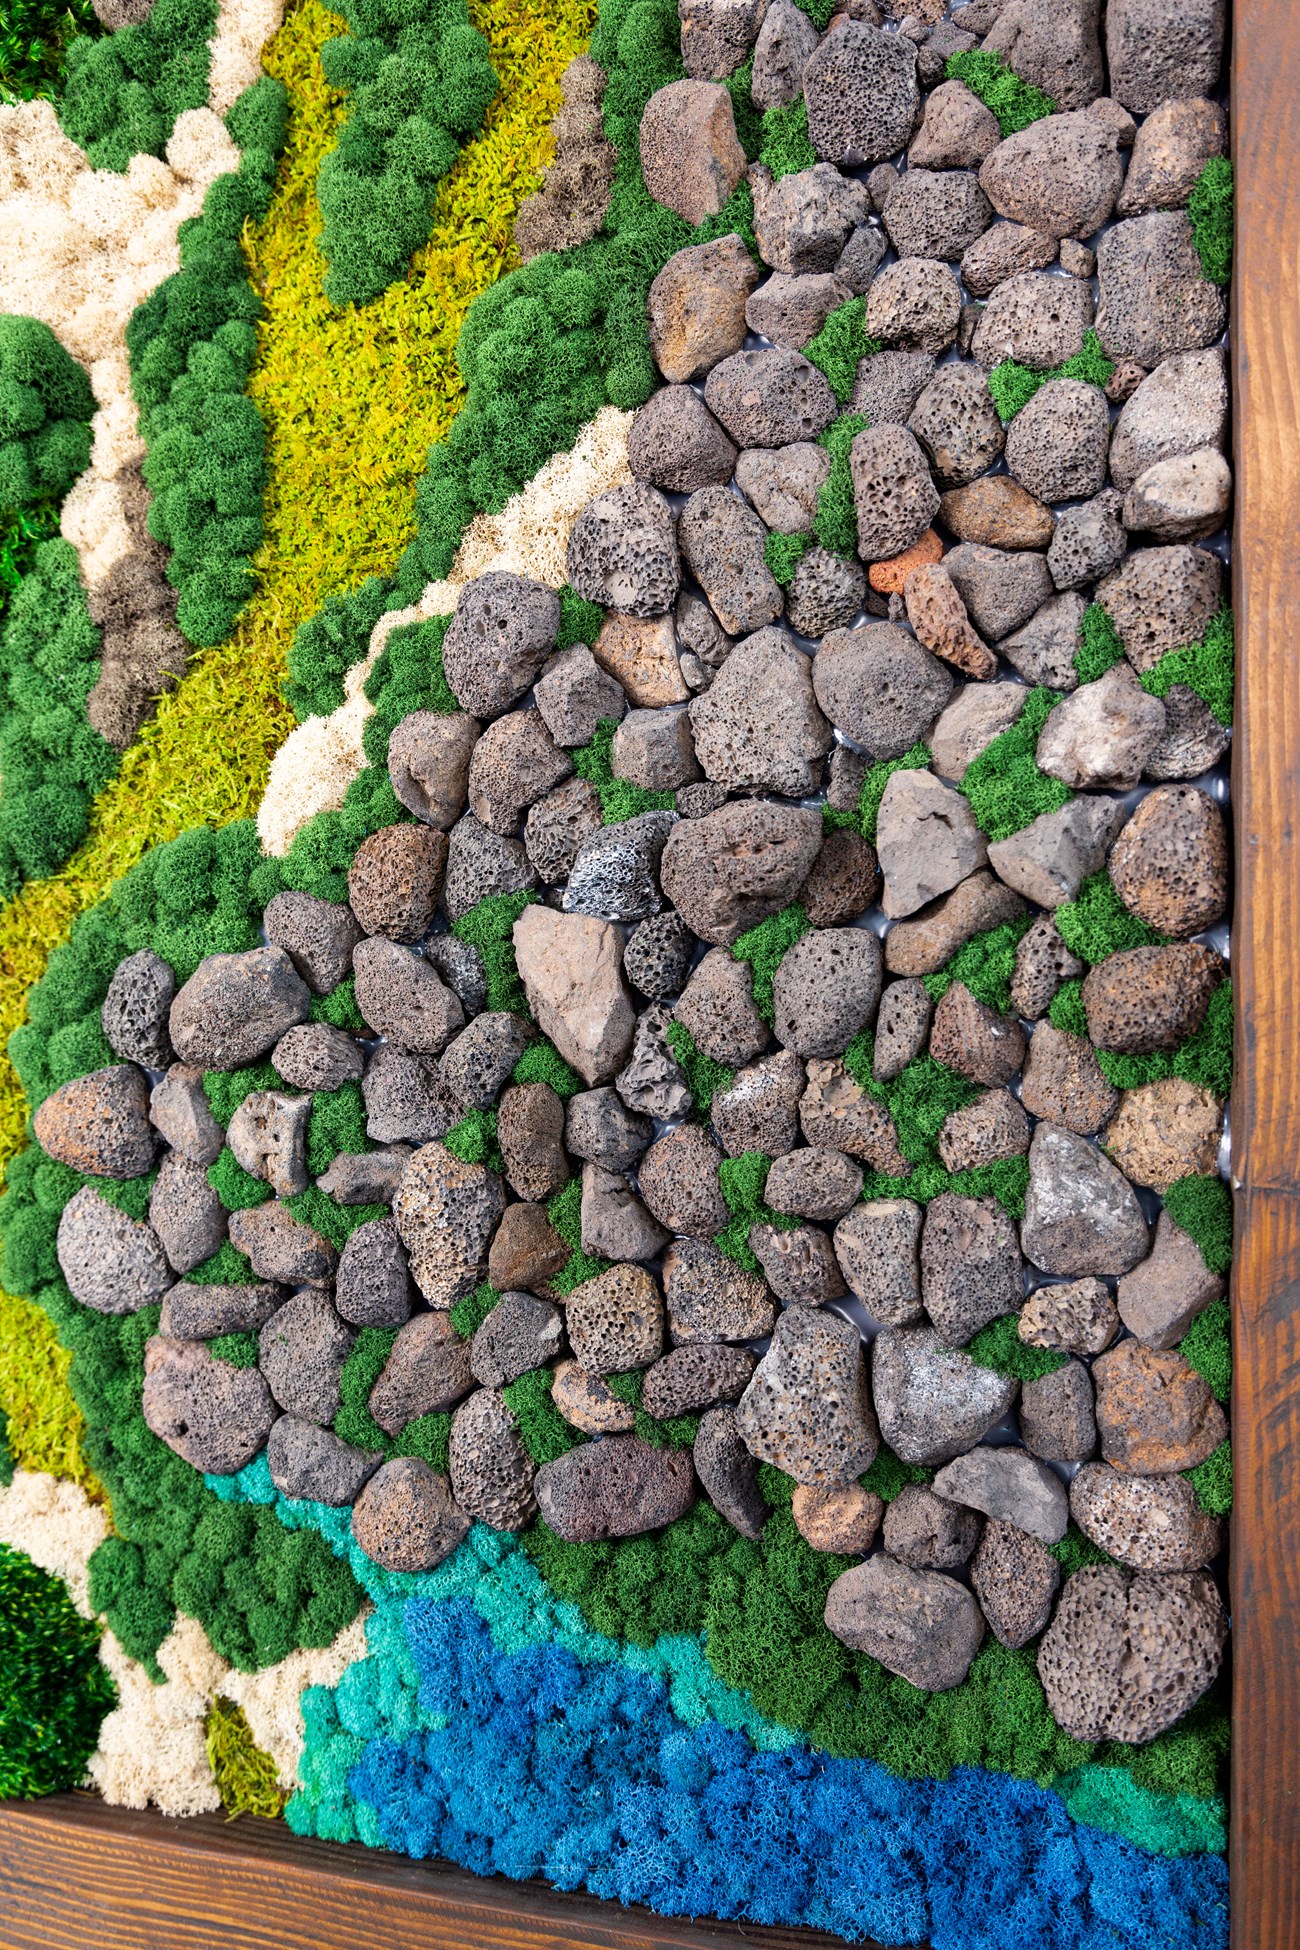 A close view of the rocks and moss of an art moss wall.